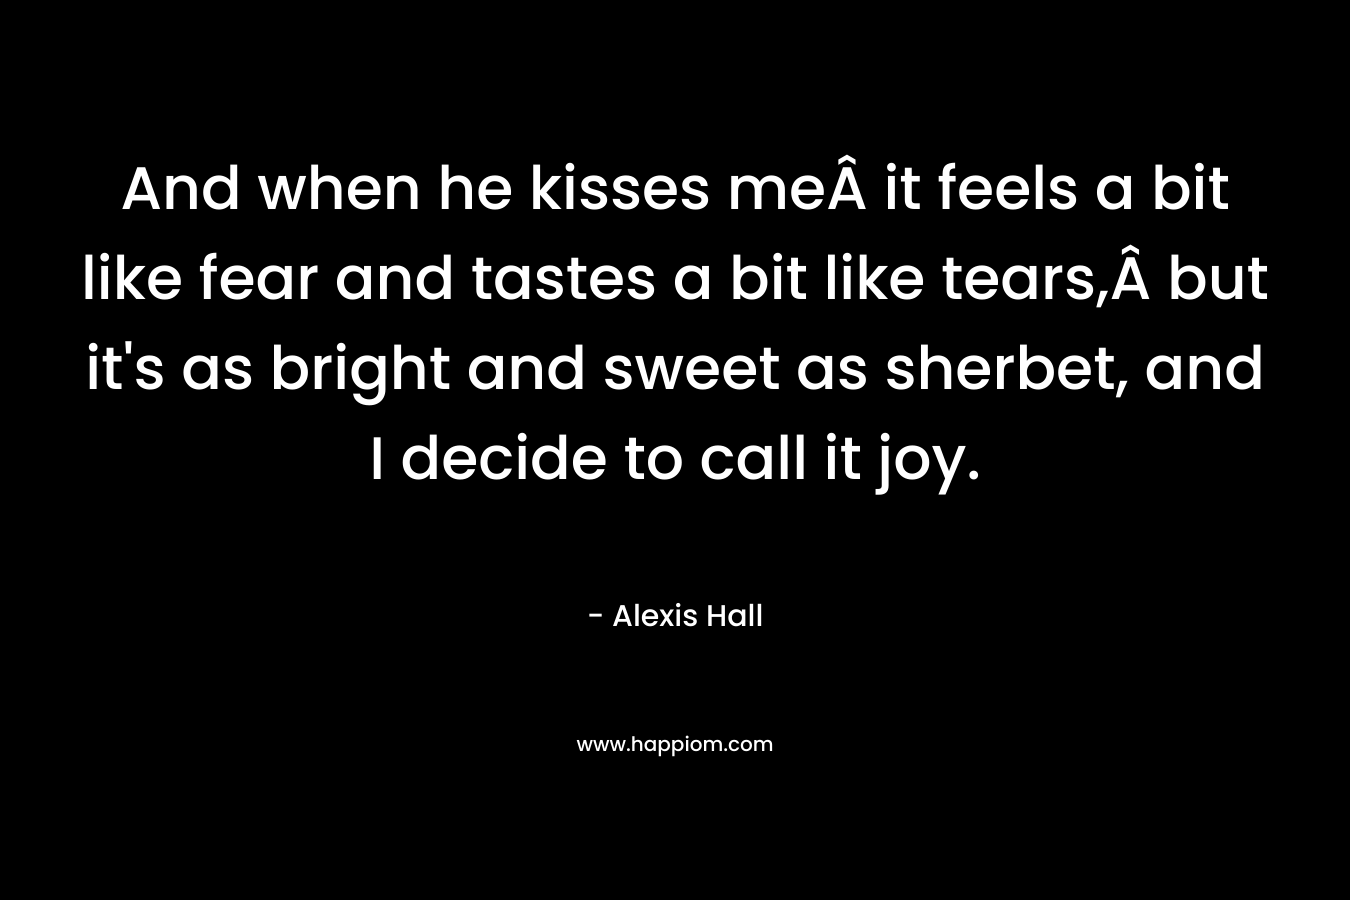 And when he kisses meÂ it feels a bit like fear and tastes a bit like tears,Â but it’s as bright and sweet as sherbet, and I decide to call it joy. – Alexis  Hall